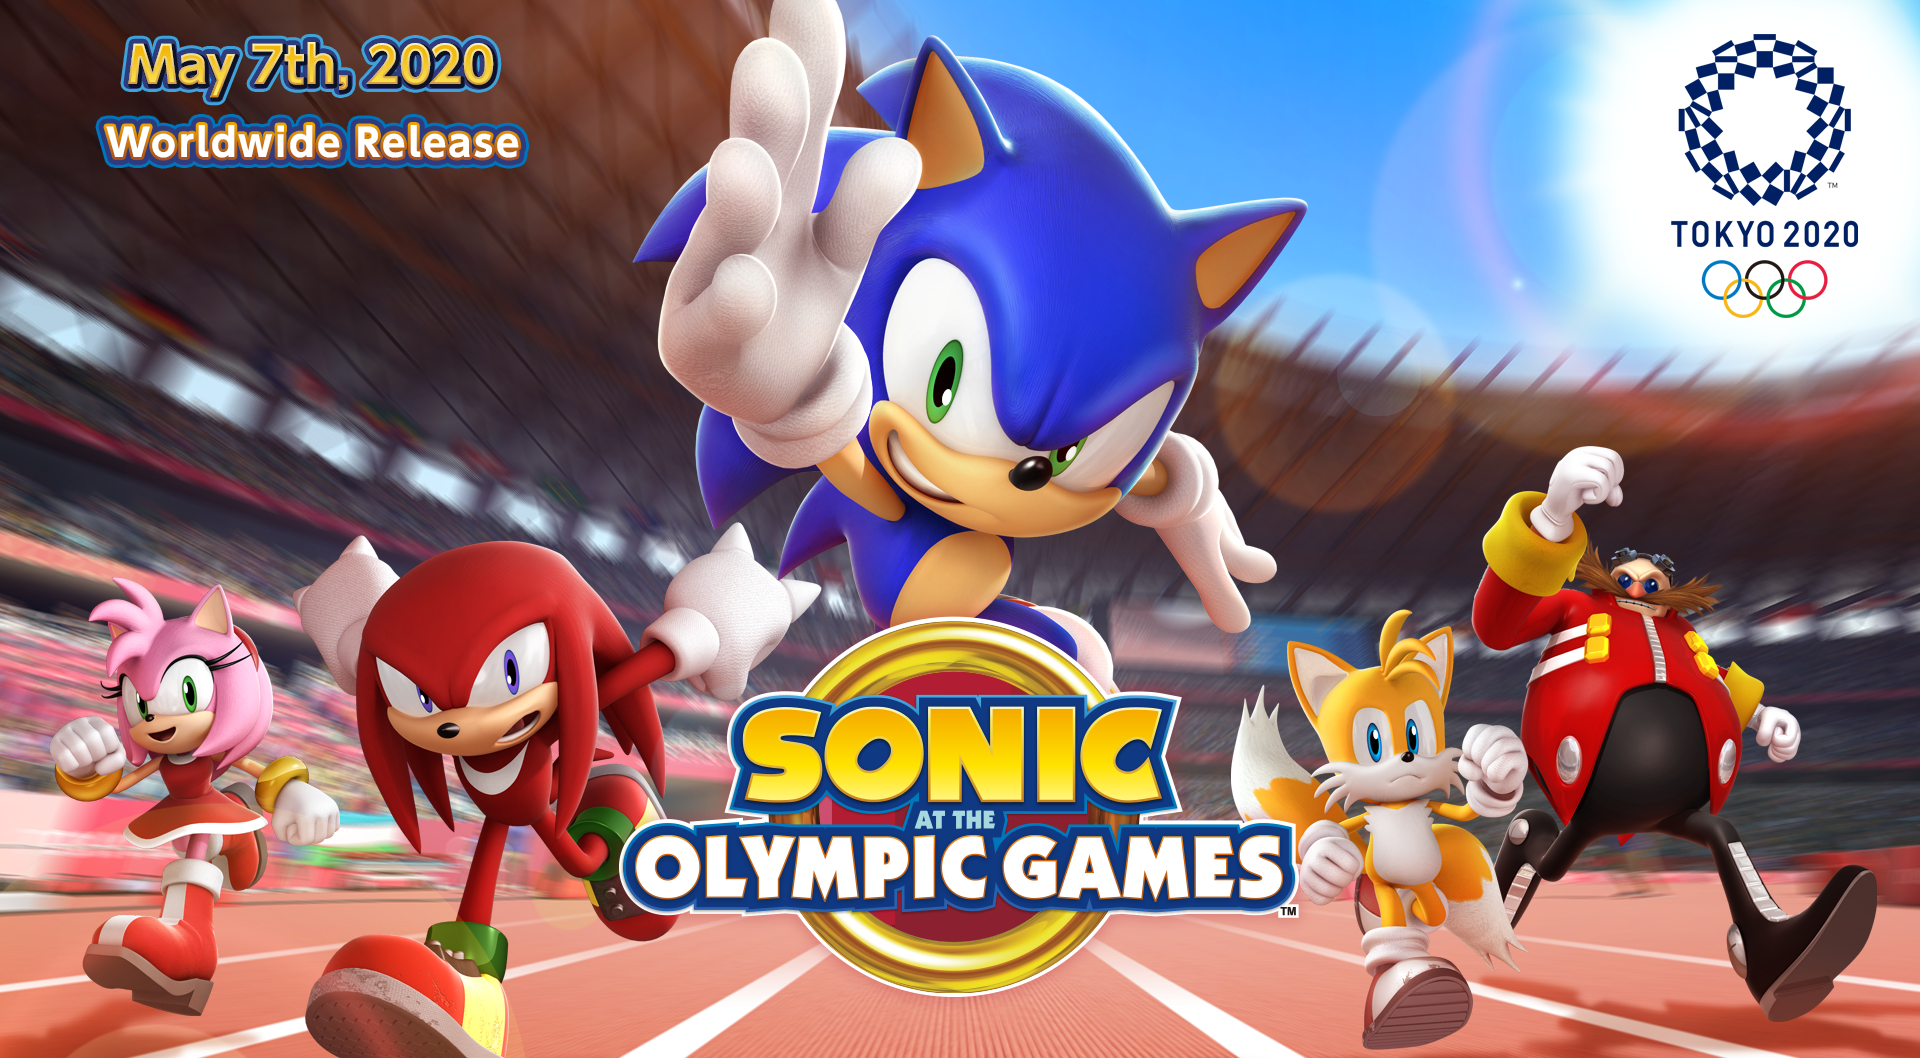 SEGA's Sonic at the Olympic Games